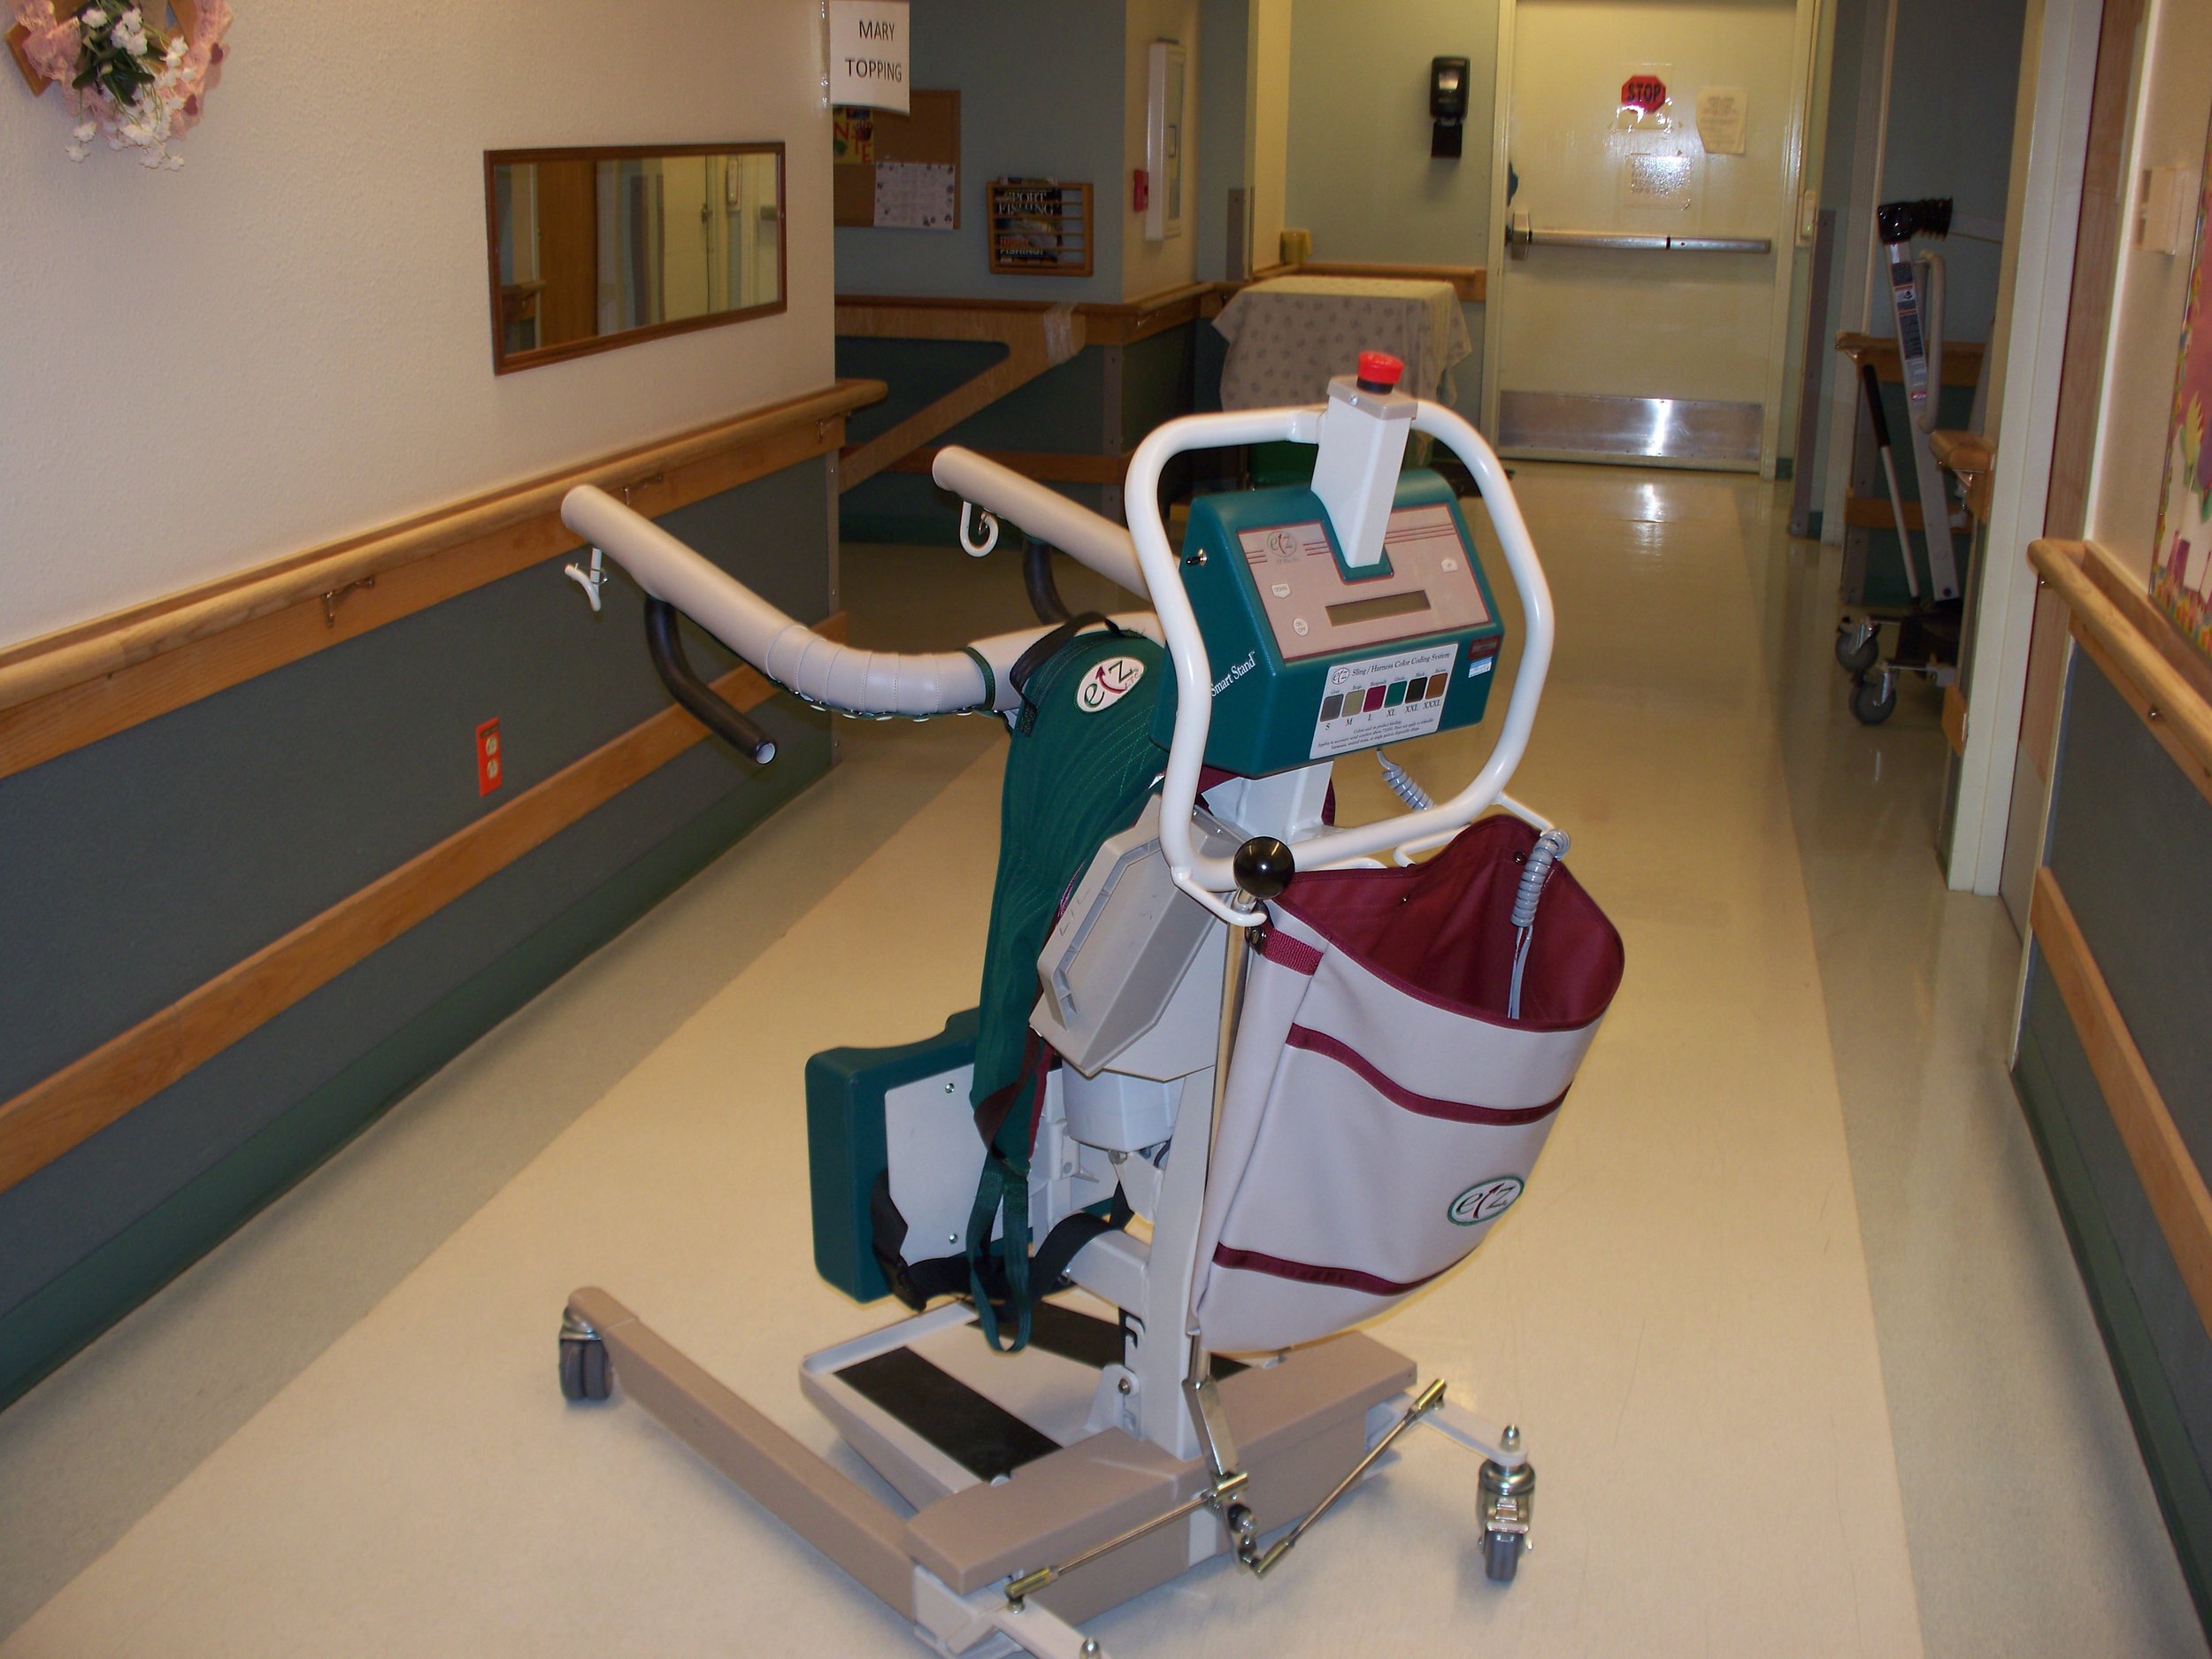 A lift donated to Extended Care